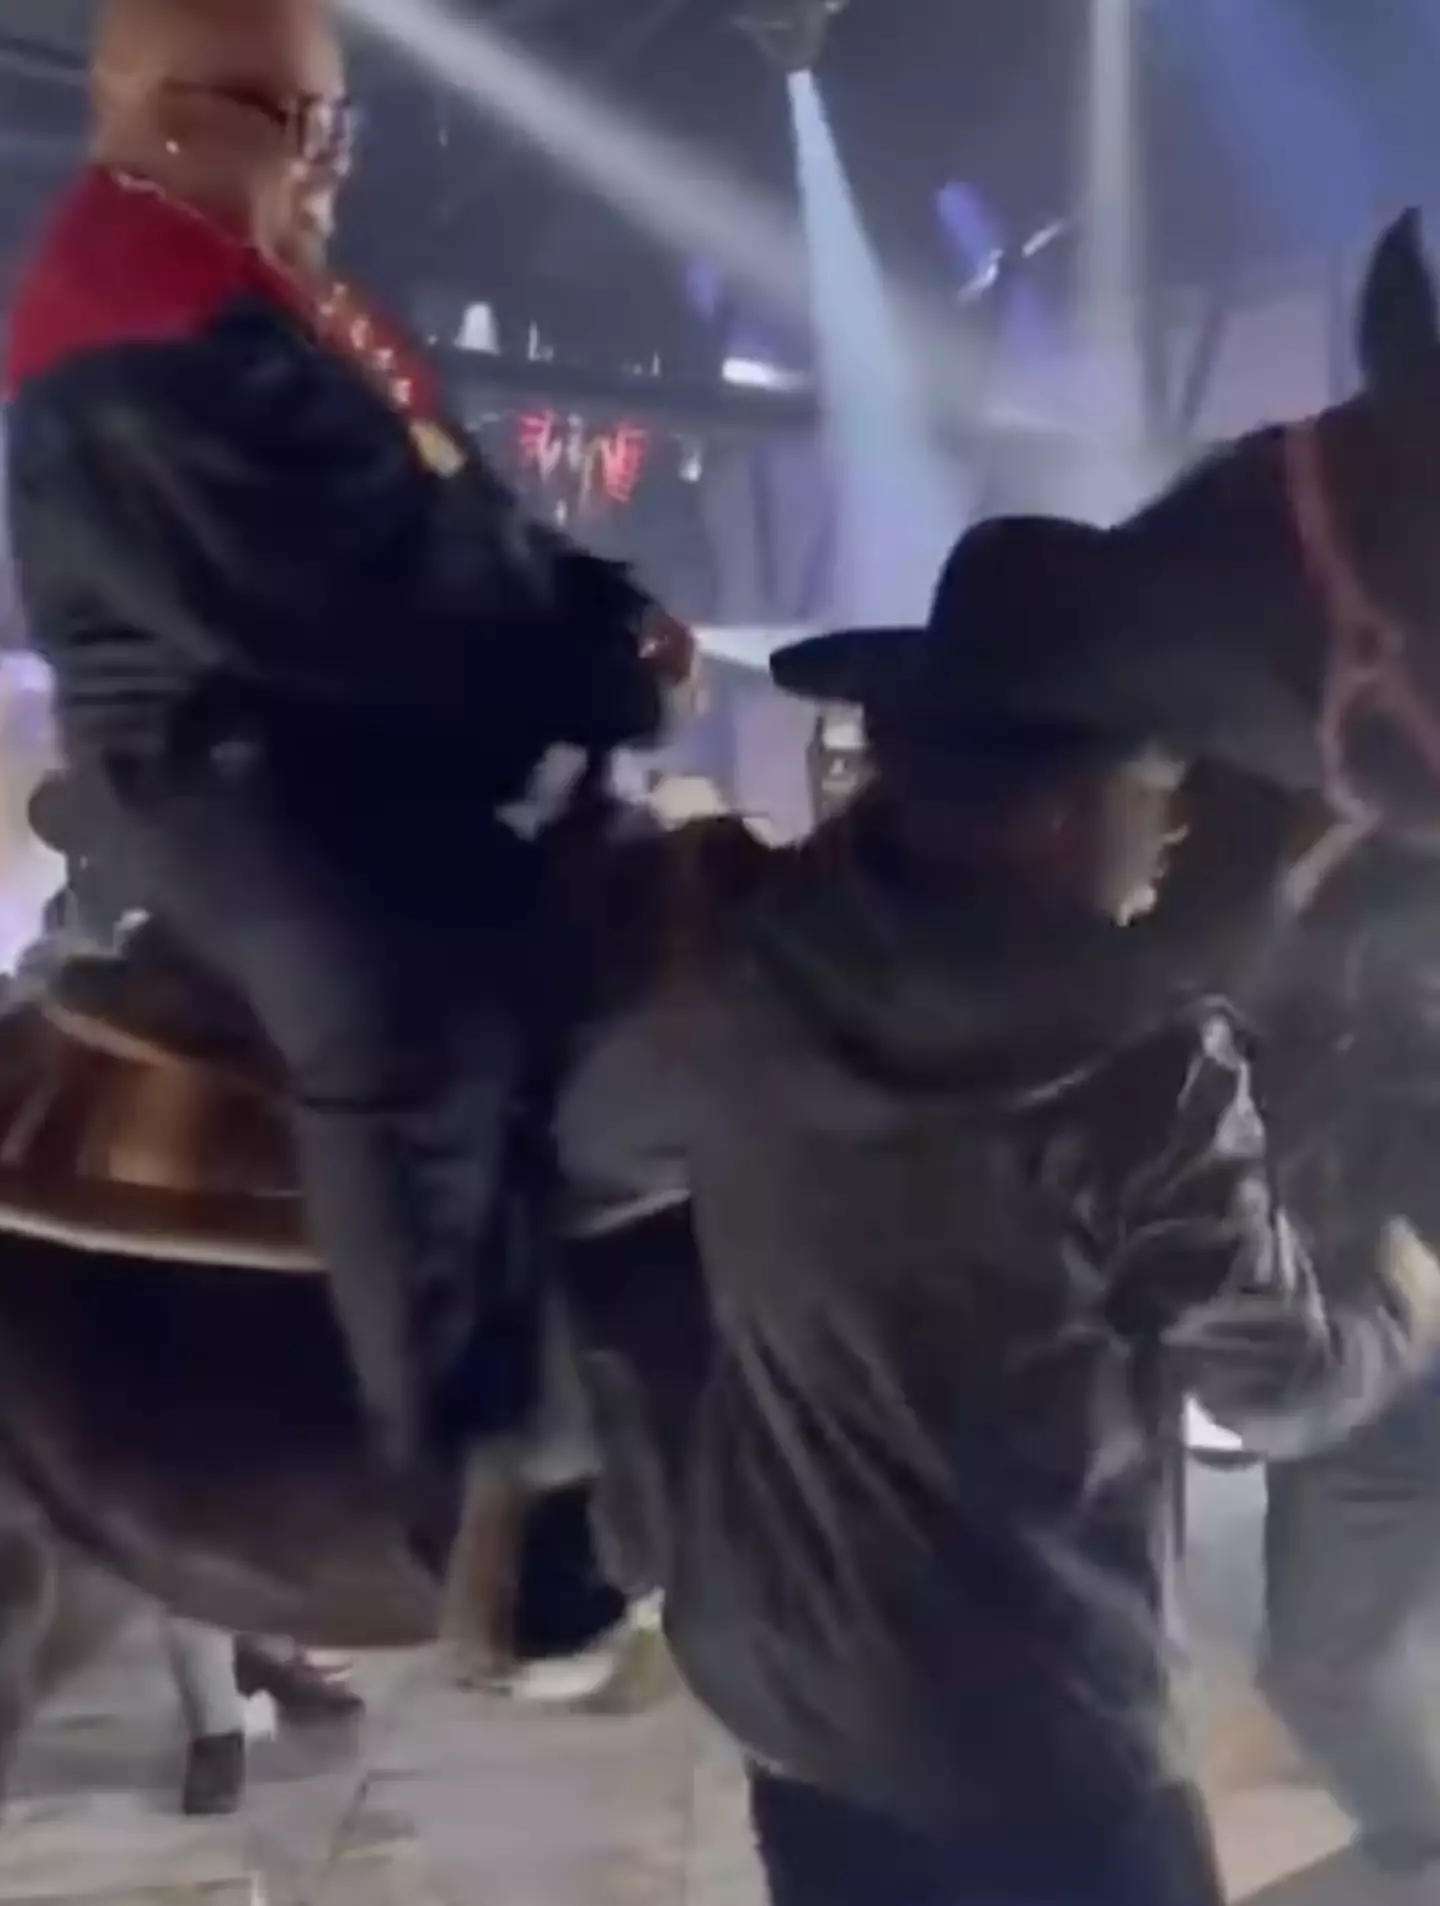 CeeLo rode into the party on horseback.